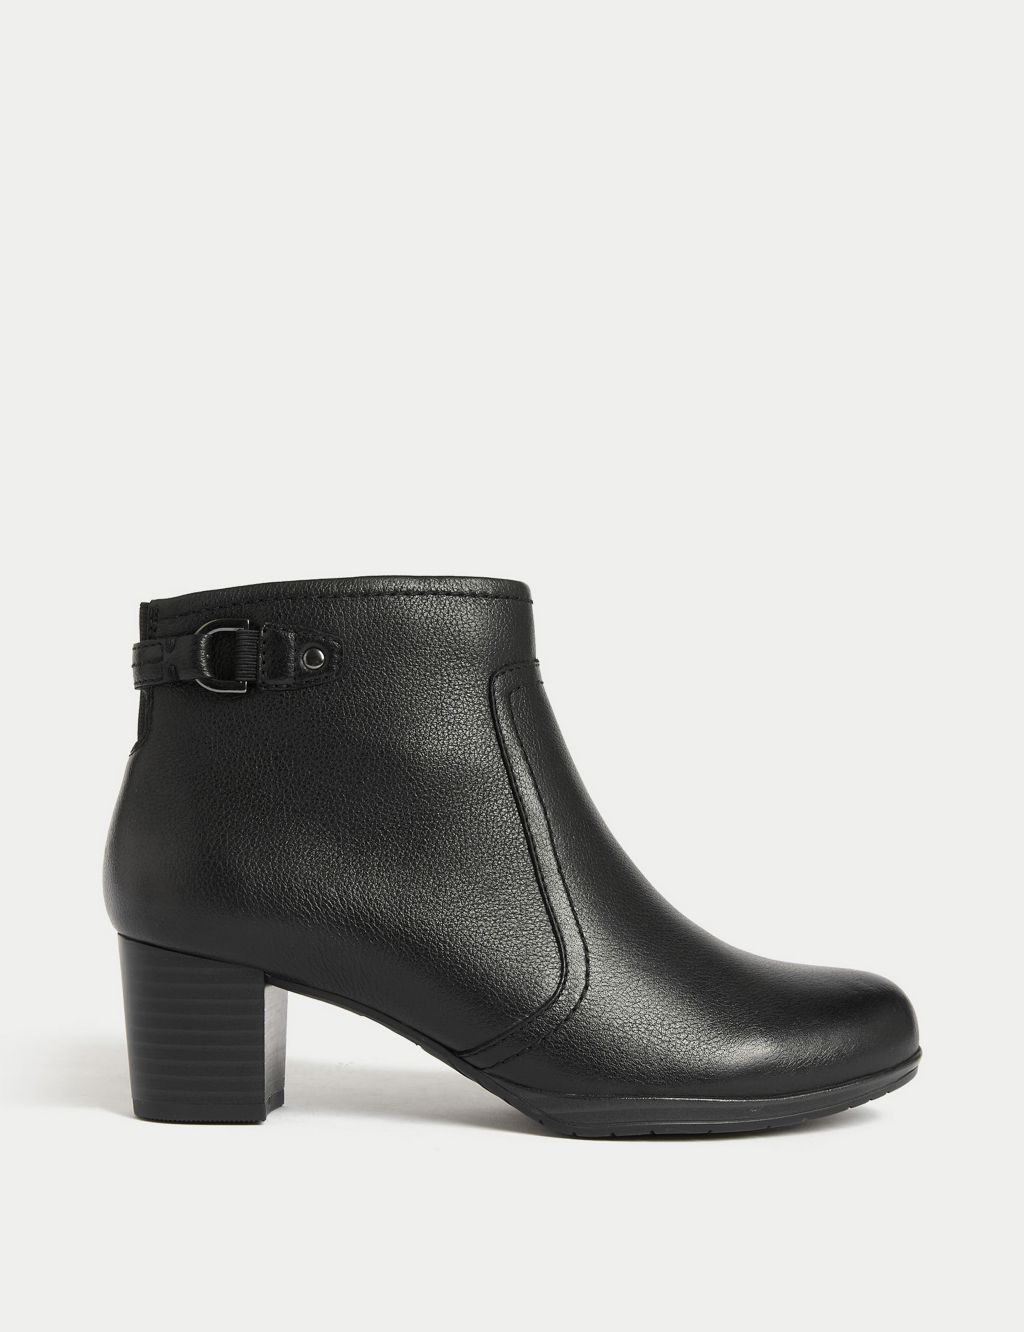 Wide Fit Leather Block Heel Ankle Boots image 1